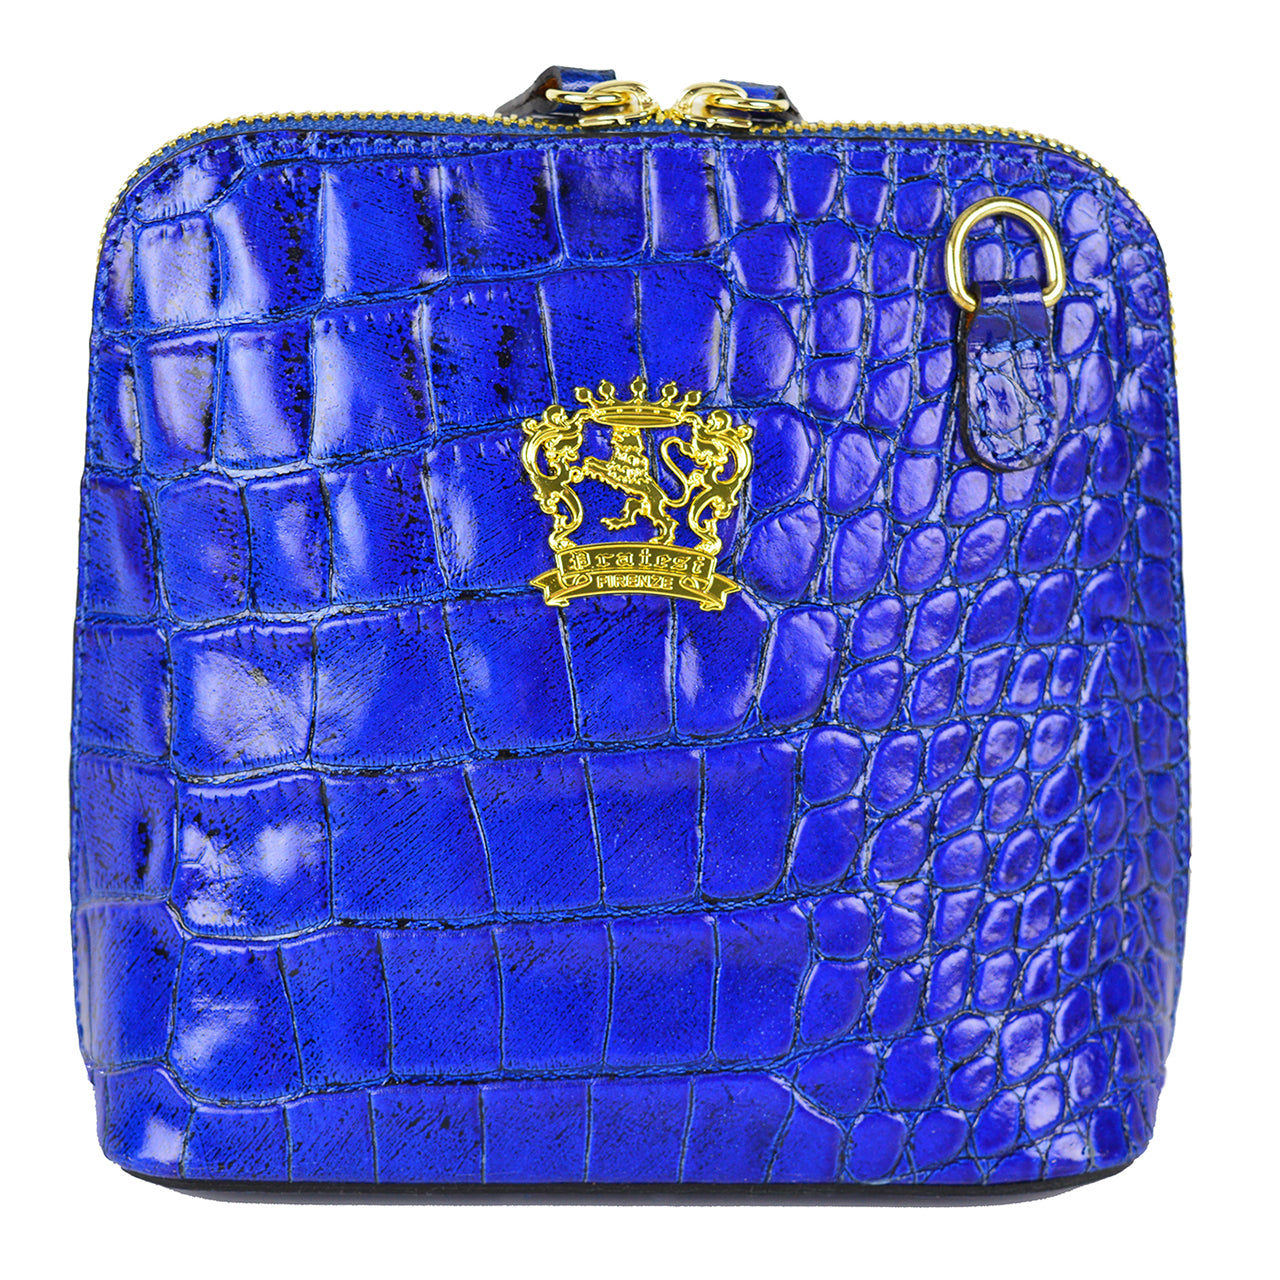 Pratesi Volterra King Lady Bag in real leather - Croco Embossed Leather Electric Blue